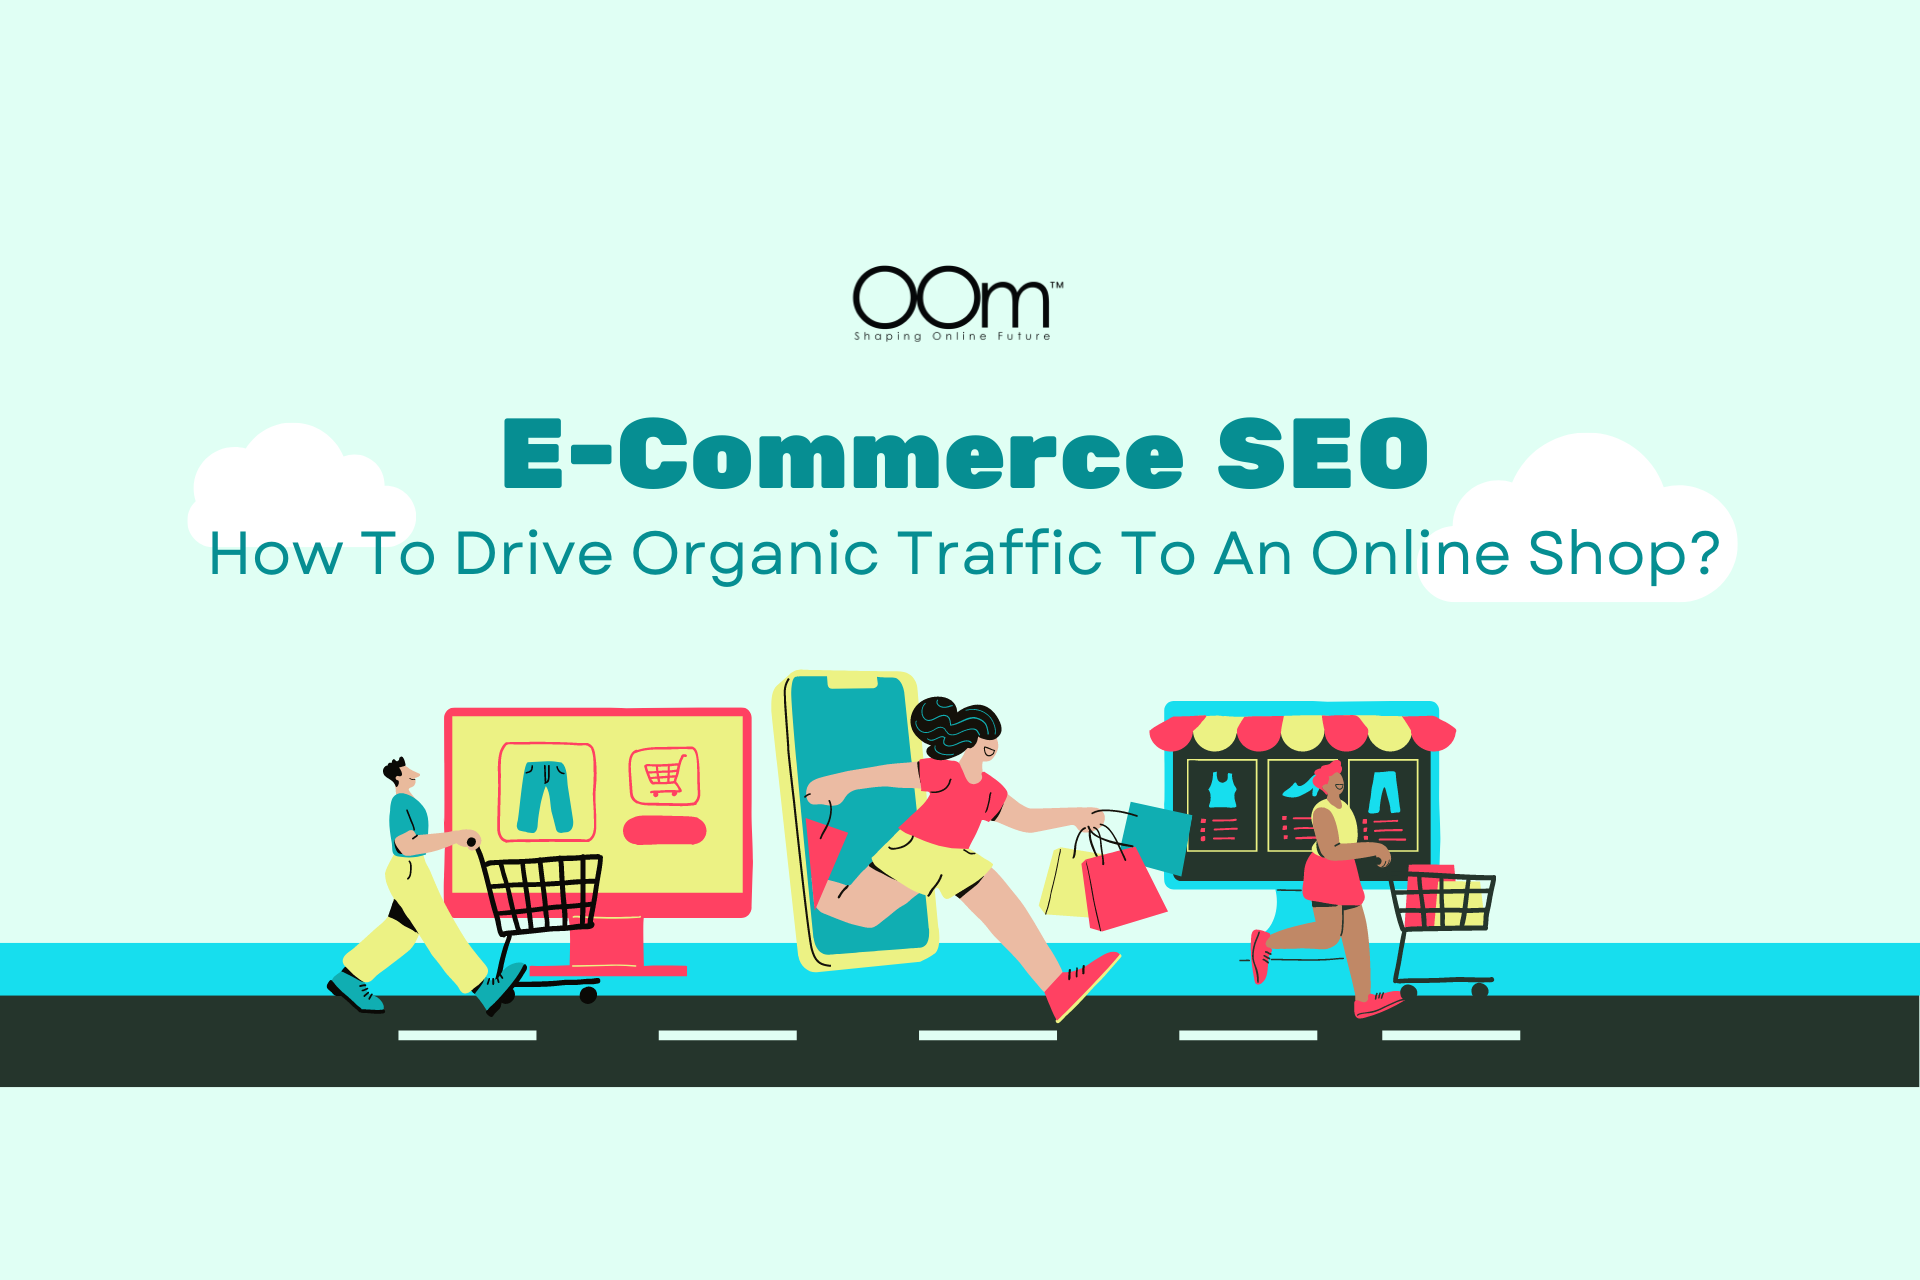 E-Commerce SEO How To Drive Organic Traffic To An Online Shop